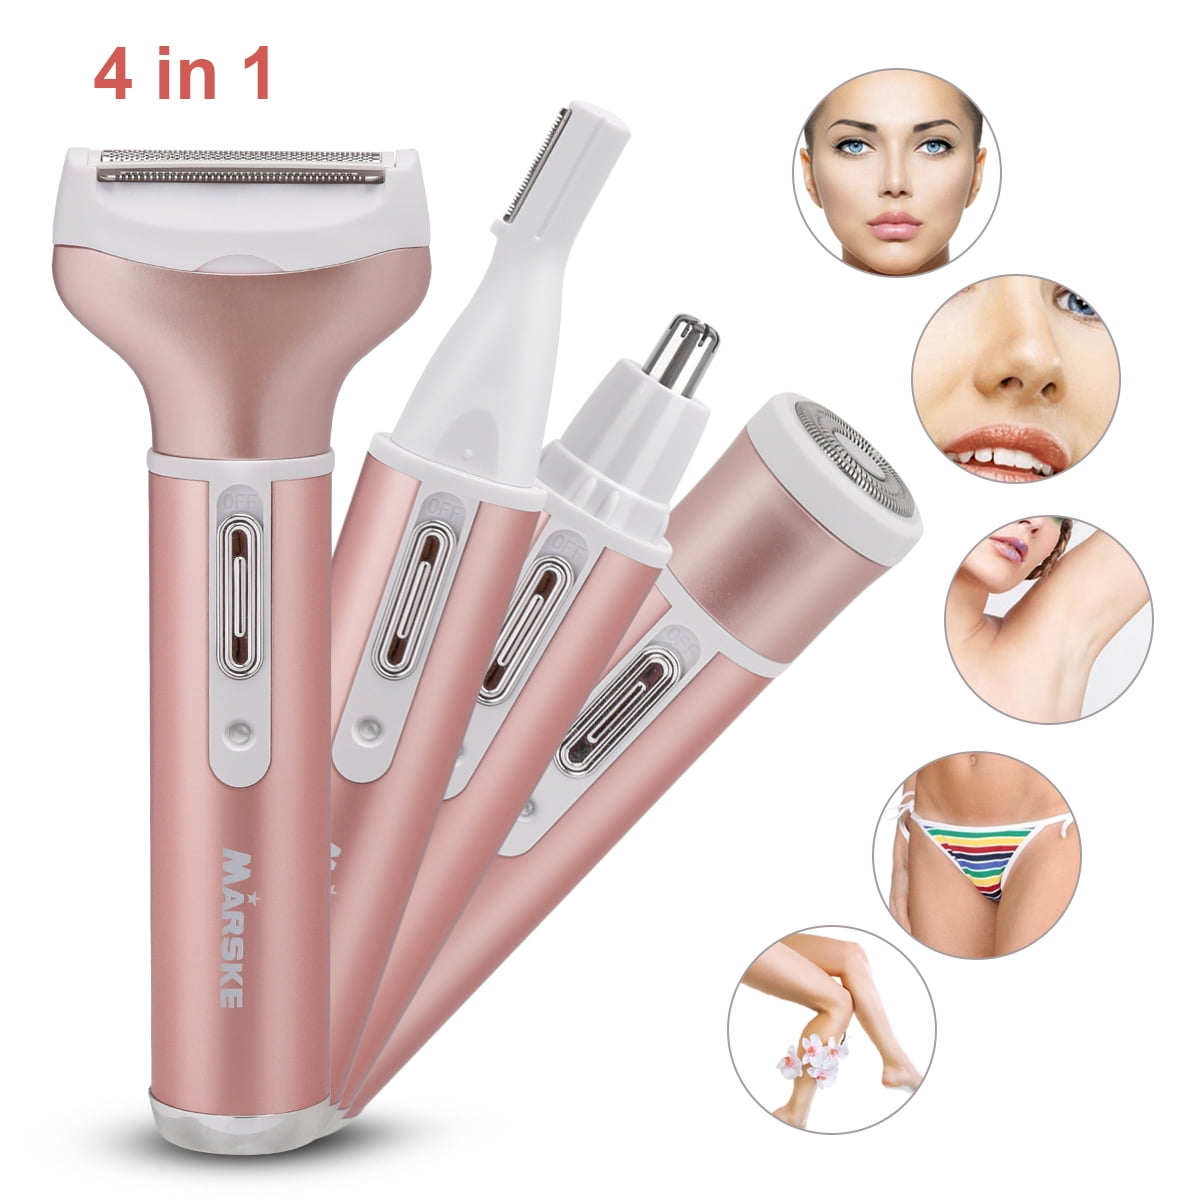 Hand Leg Shaver Nose Hair & Eyebrow Trimmer 5 in 1 Face Grooming Tools Facial Painless Hair Removal Trimmer Brush USB Charging Hair Remover for Women 